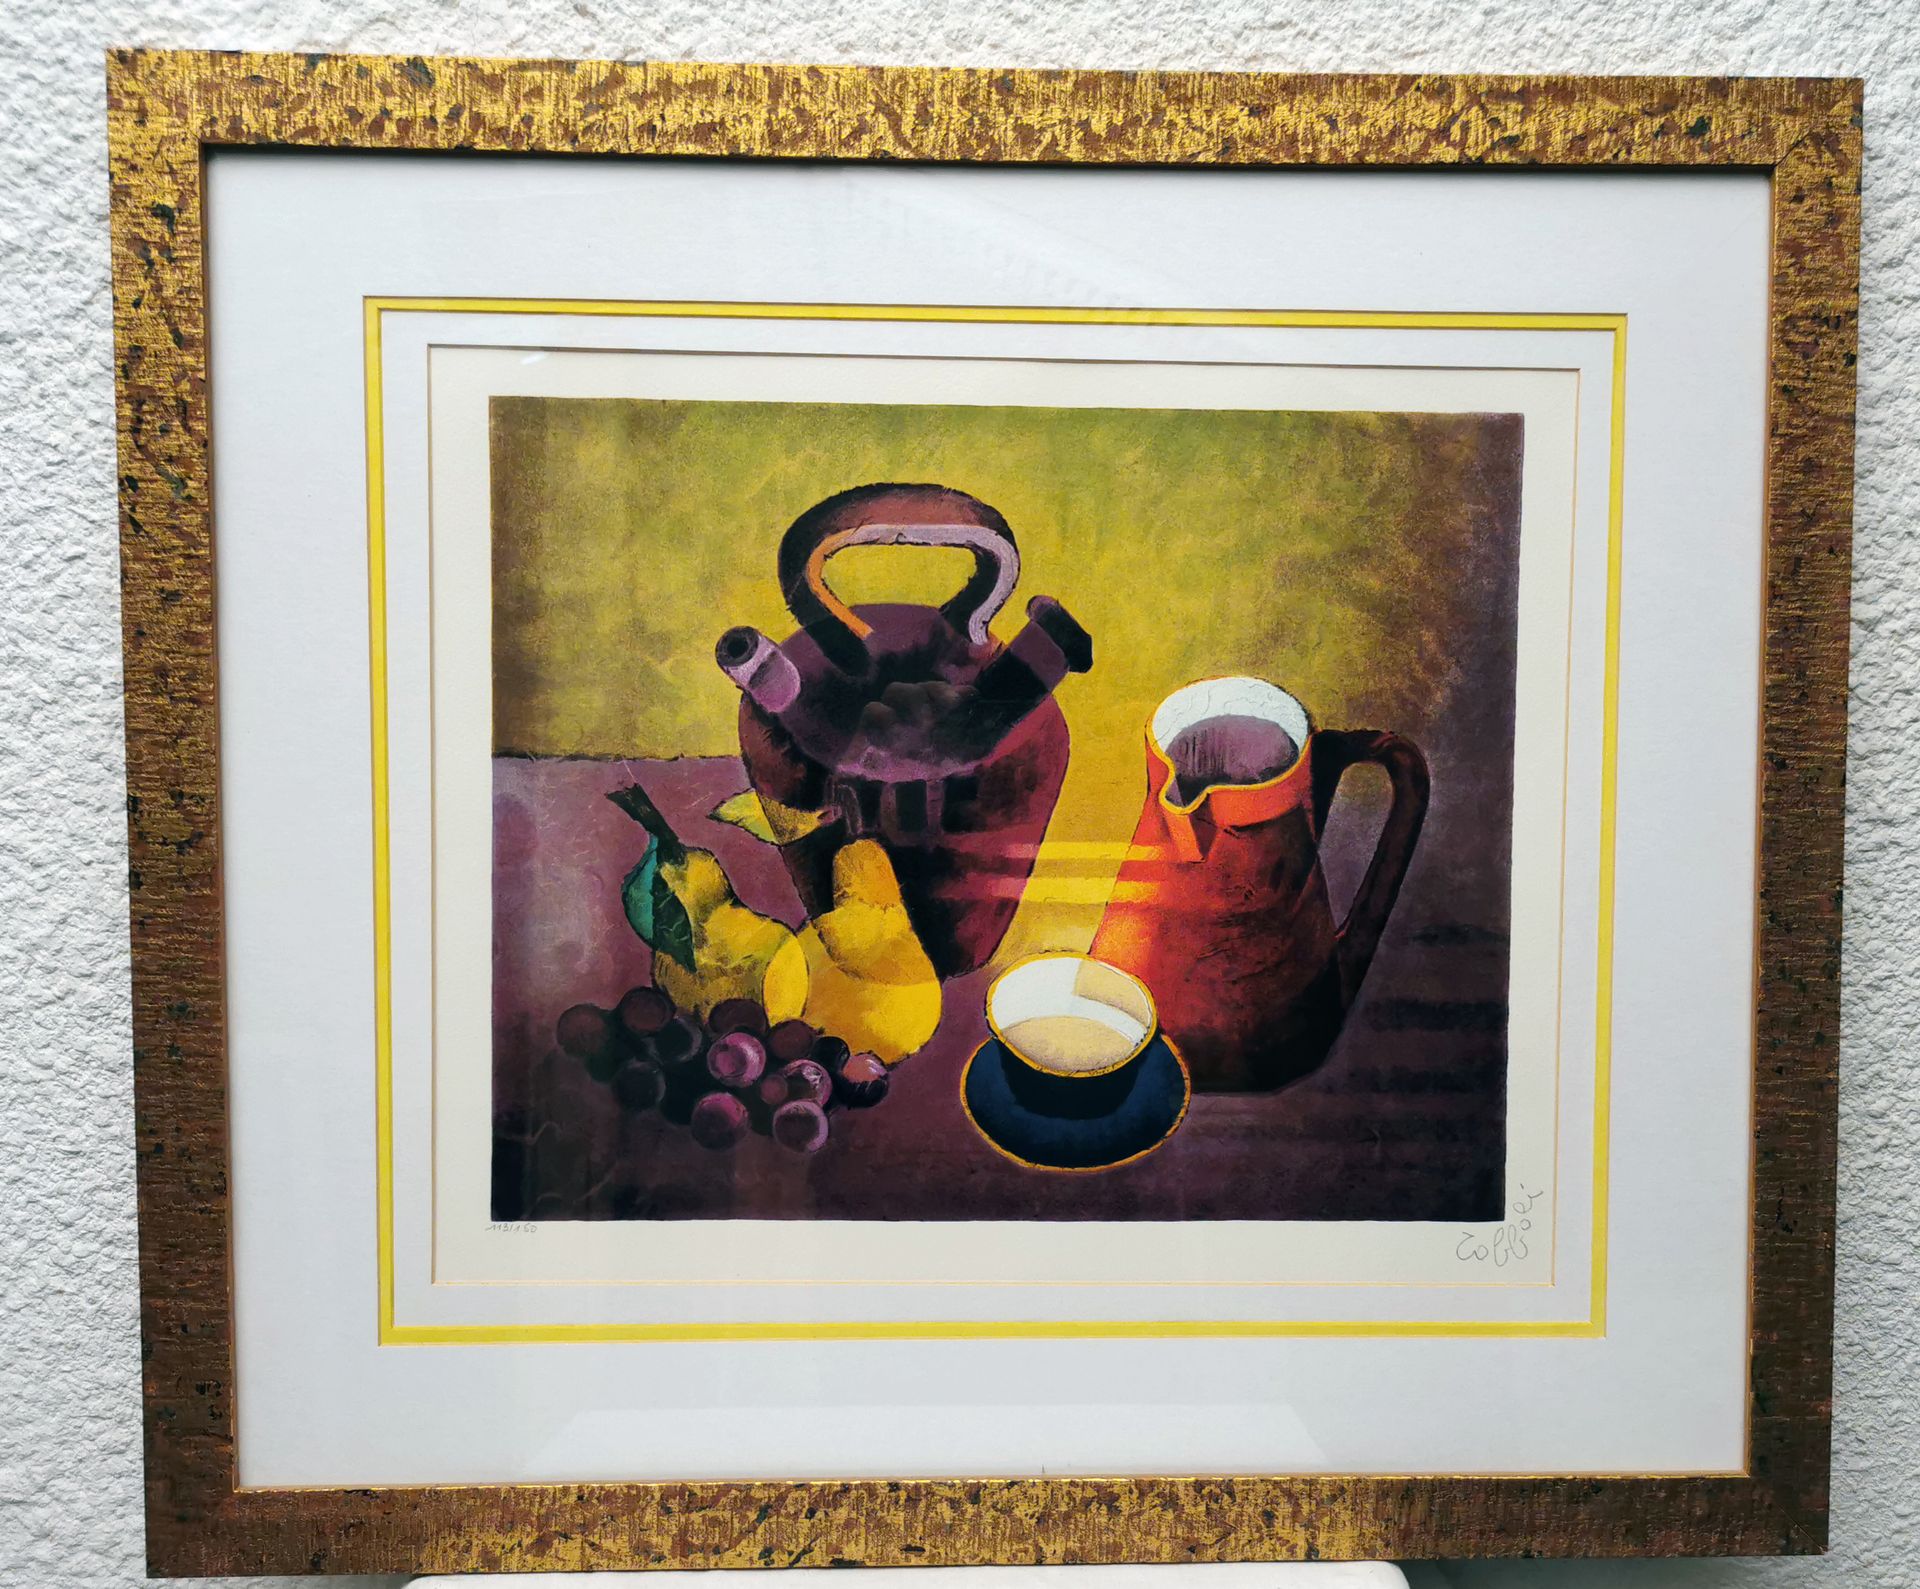 TOFFOLI TOFFOLI SBD "STILL LIFE WITH PITCHERS" LITHOGRAPH 113/150 UNFRAMED 51X38&hellip;